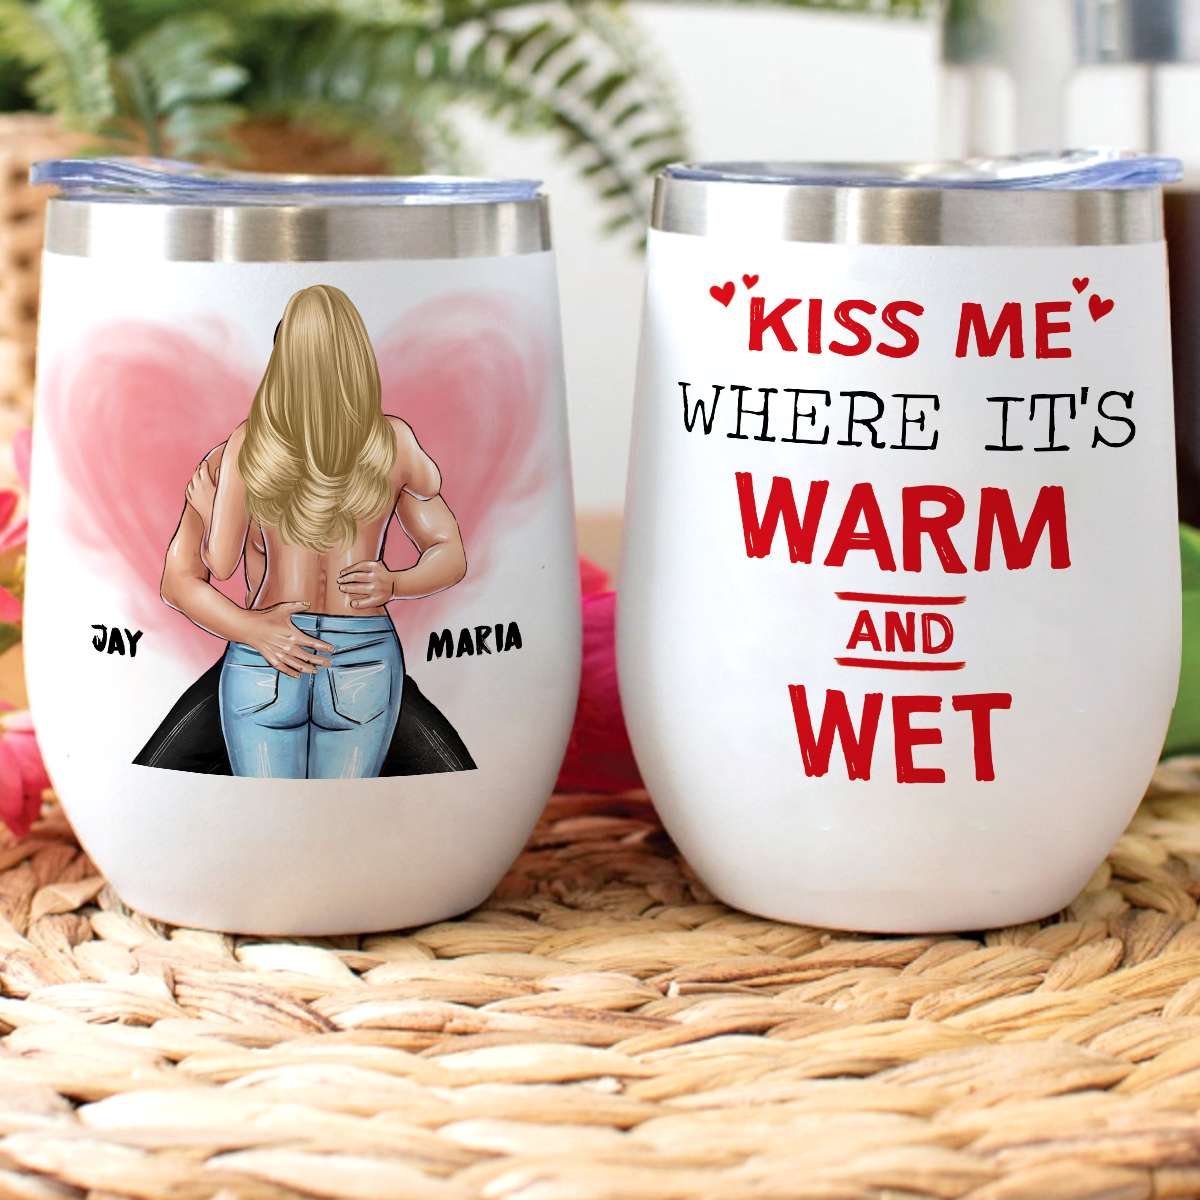 It's Not That I'm Horny Or Sexy, Naughty Couple Make Love Wine Tumbler Gift Valentine Day - Wine Tumbler - GoDuckee